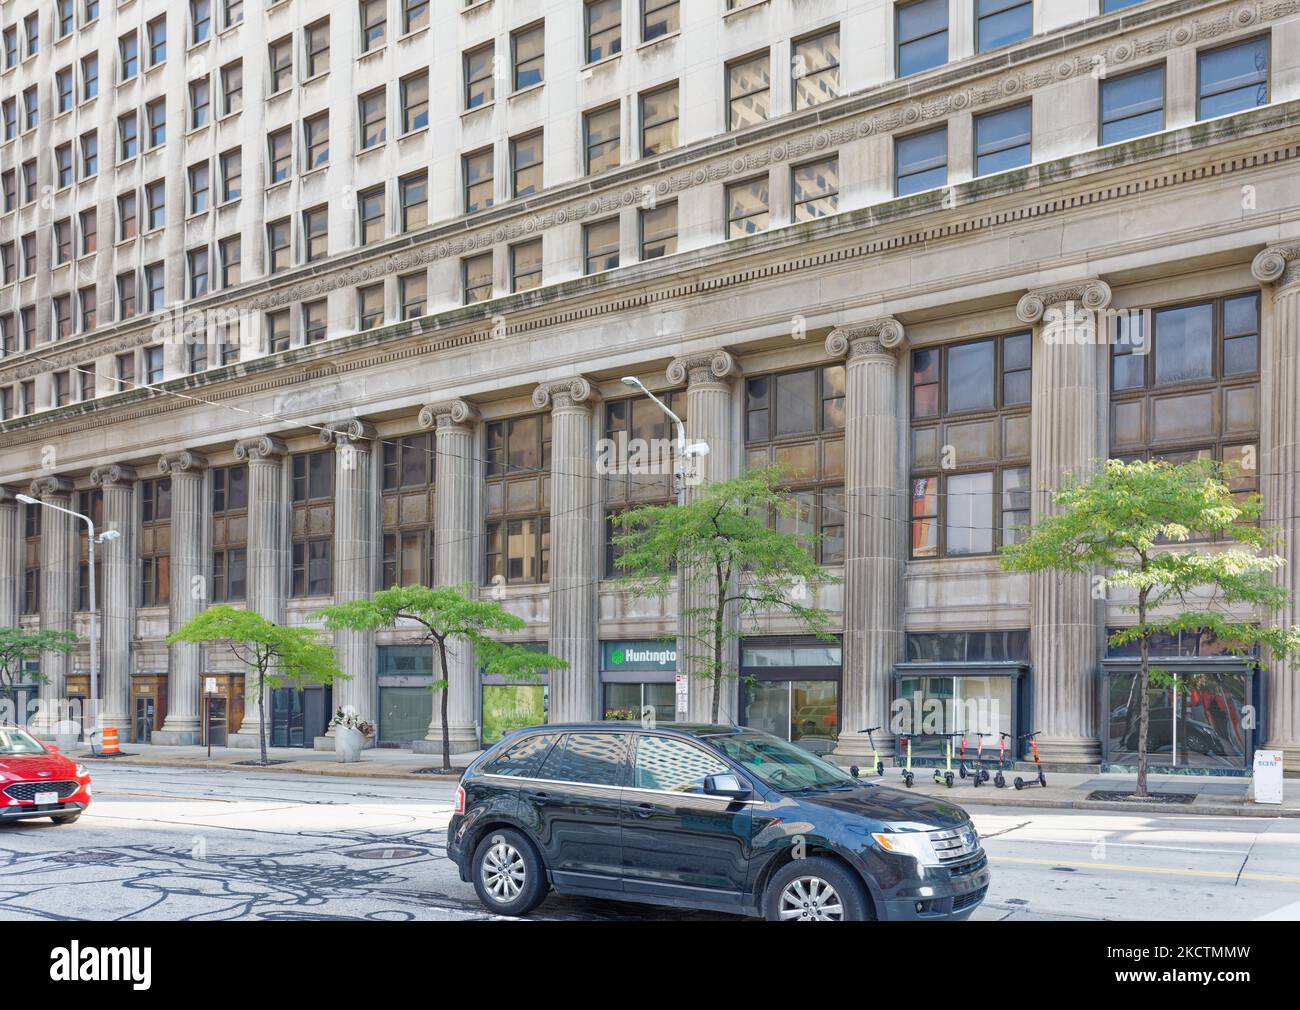 The Centennial is the former Union Trust Building, being converted to mixed use residential/hotel/office building. Stock Photo